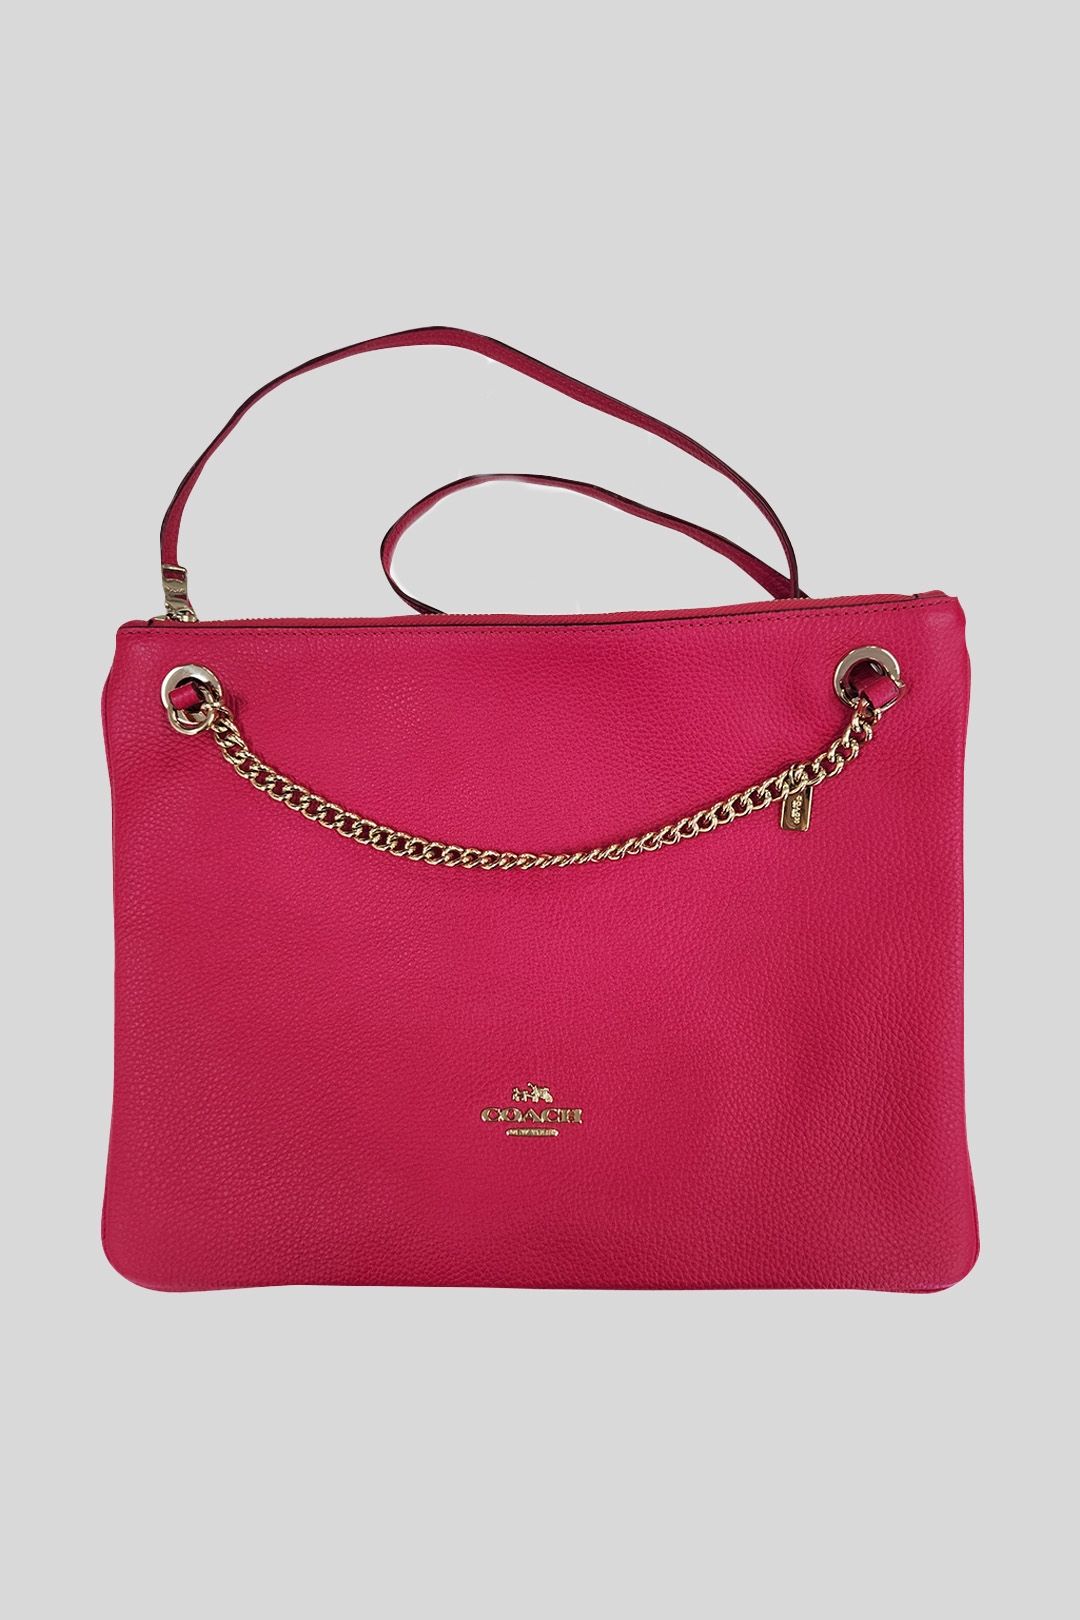 Coach - Hot Pink Pebbled Leather Crossbody Bag